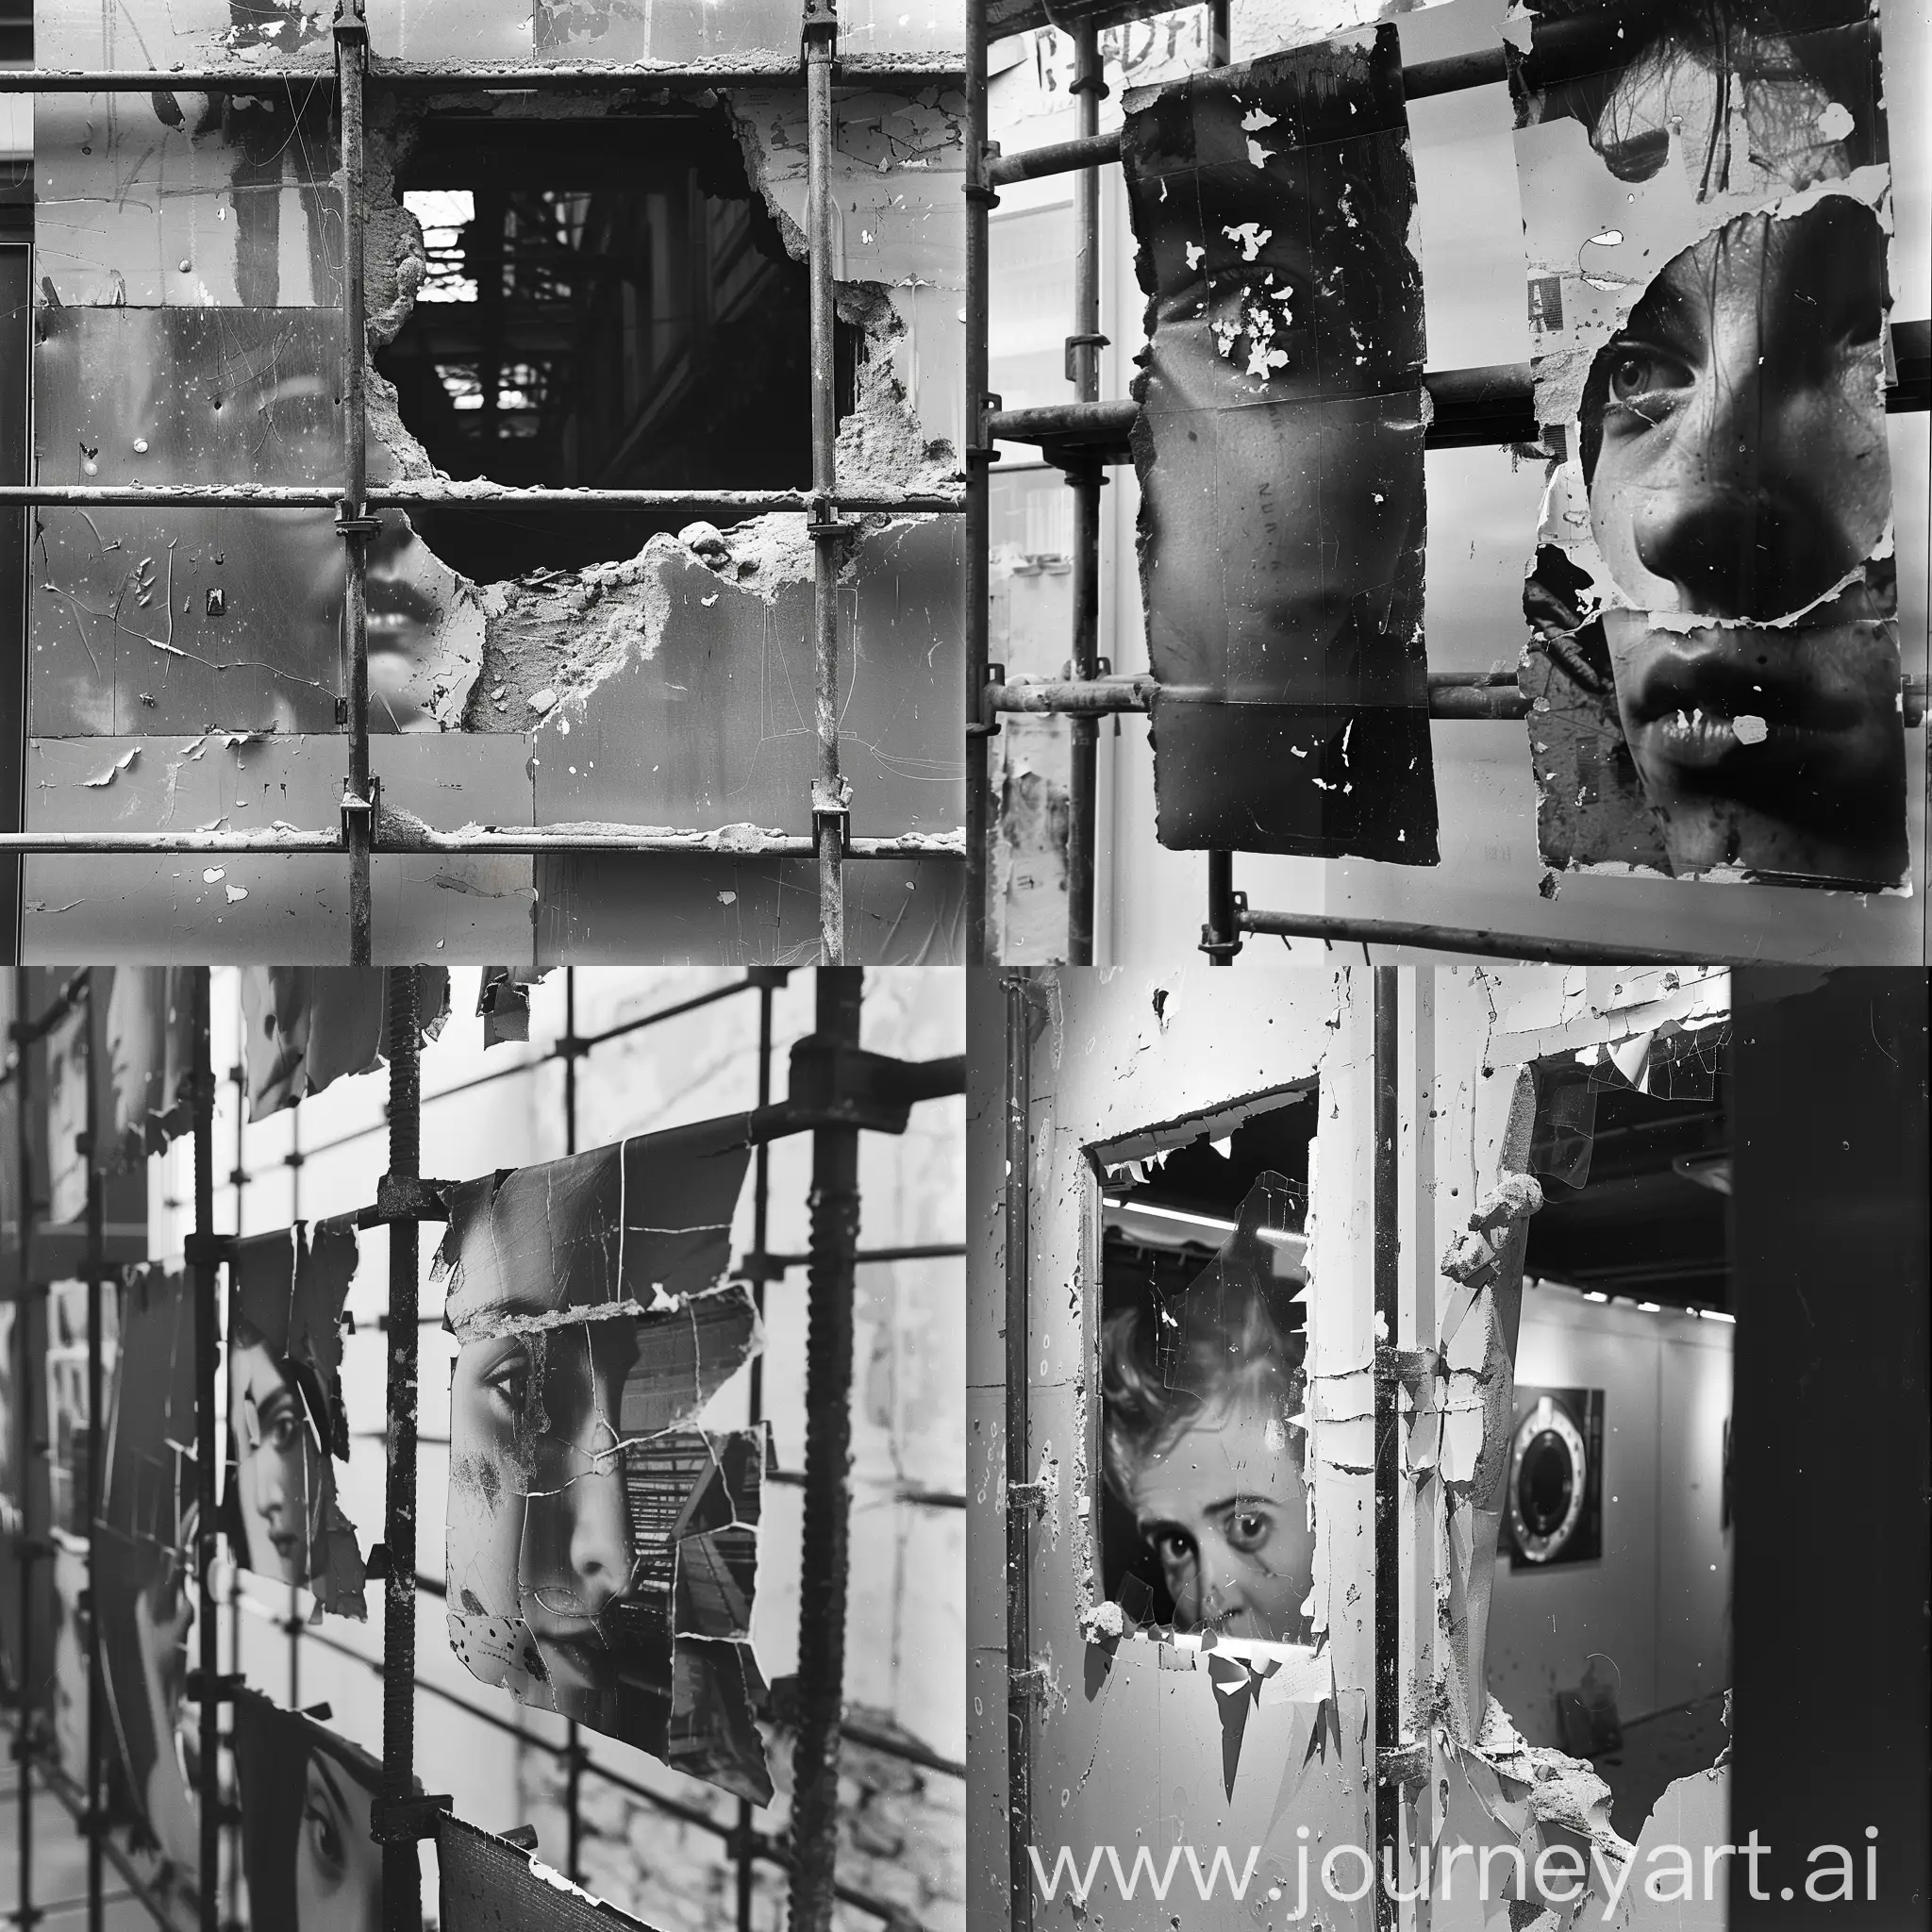 black and white analogue photo exhibition that the photos are in scaffolding and have some holes and tears on them and behide them some more photos can be seen through these holes